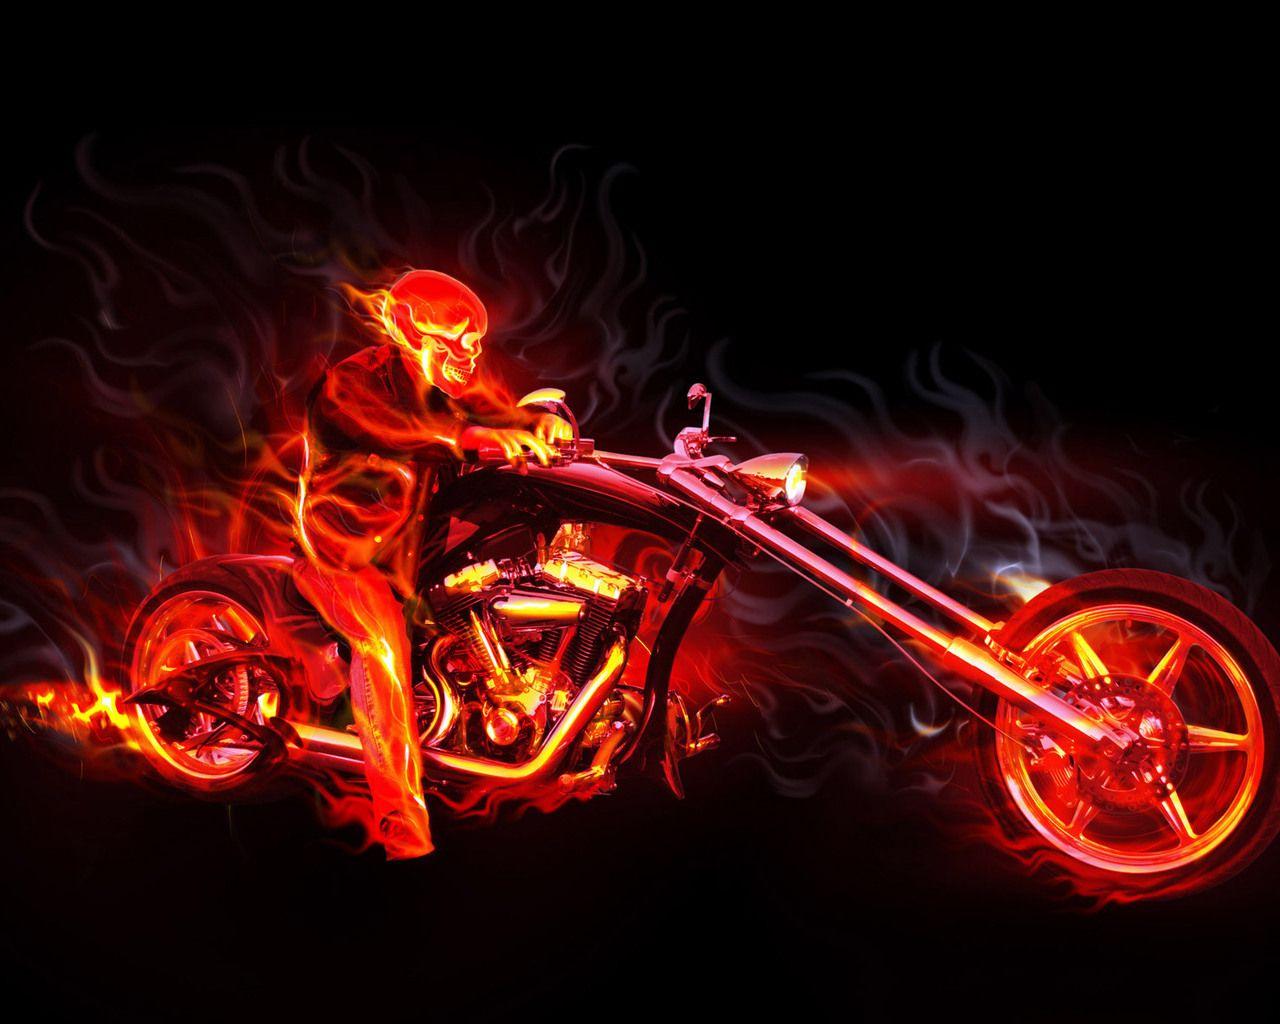 Ghost Rider 3D Wallpapers Mobile - Wallpaper Cave